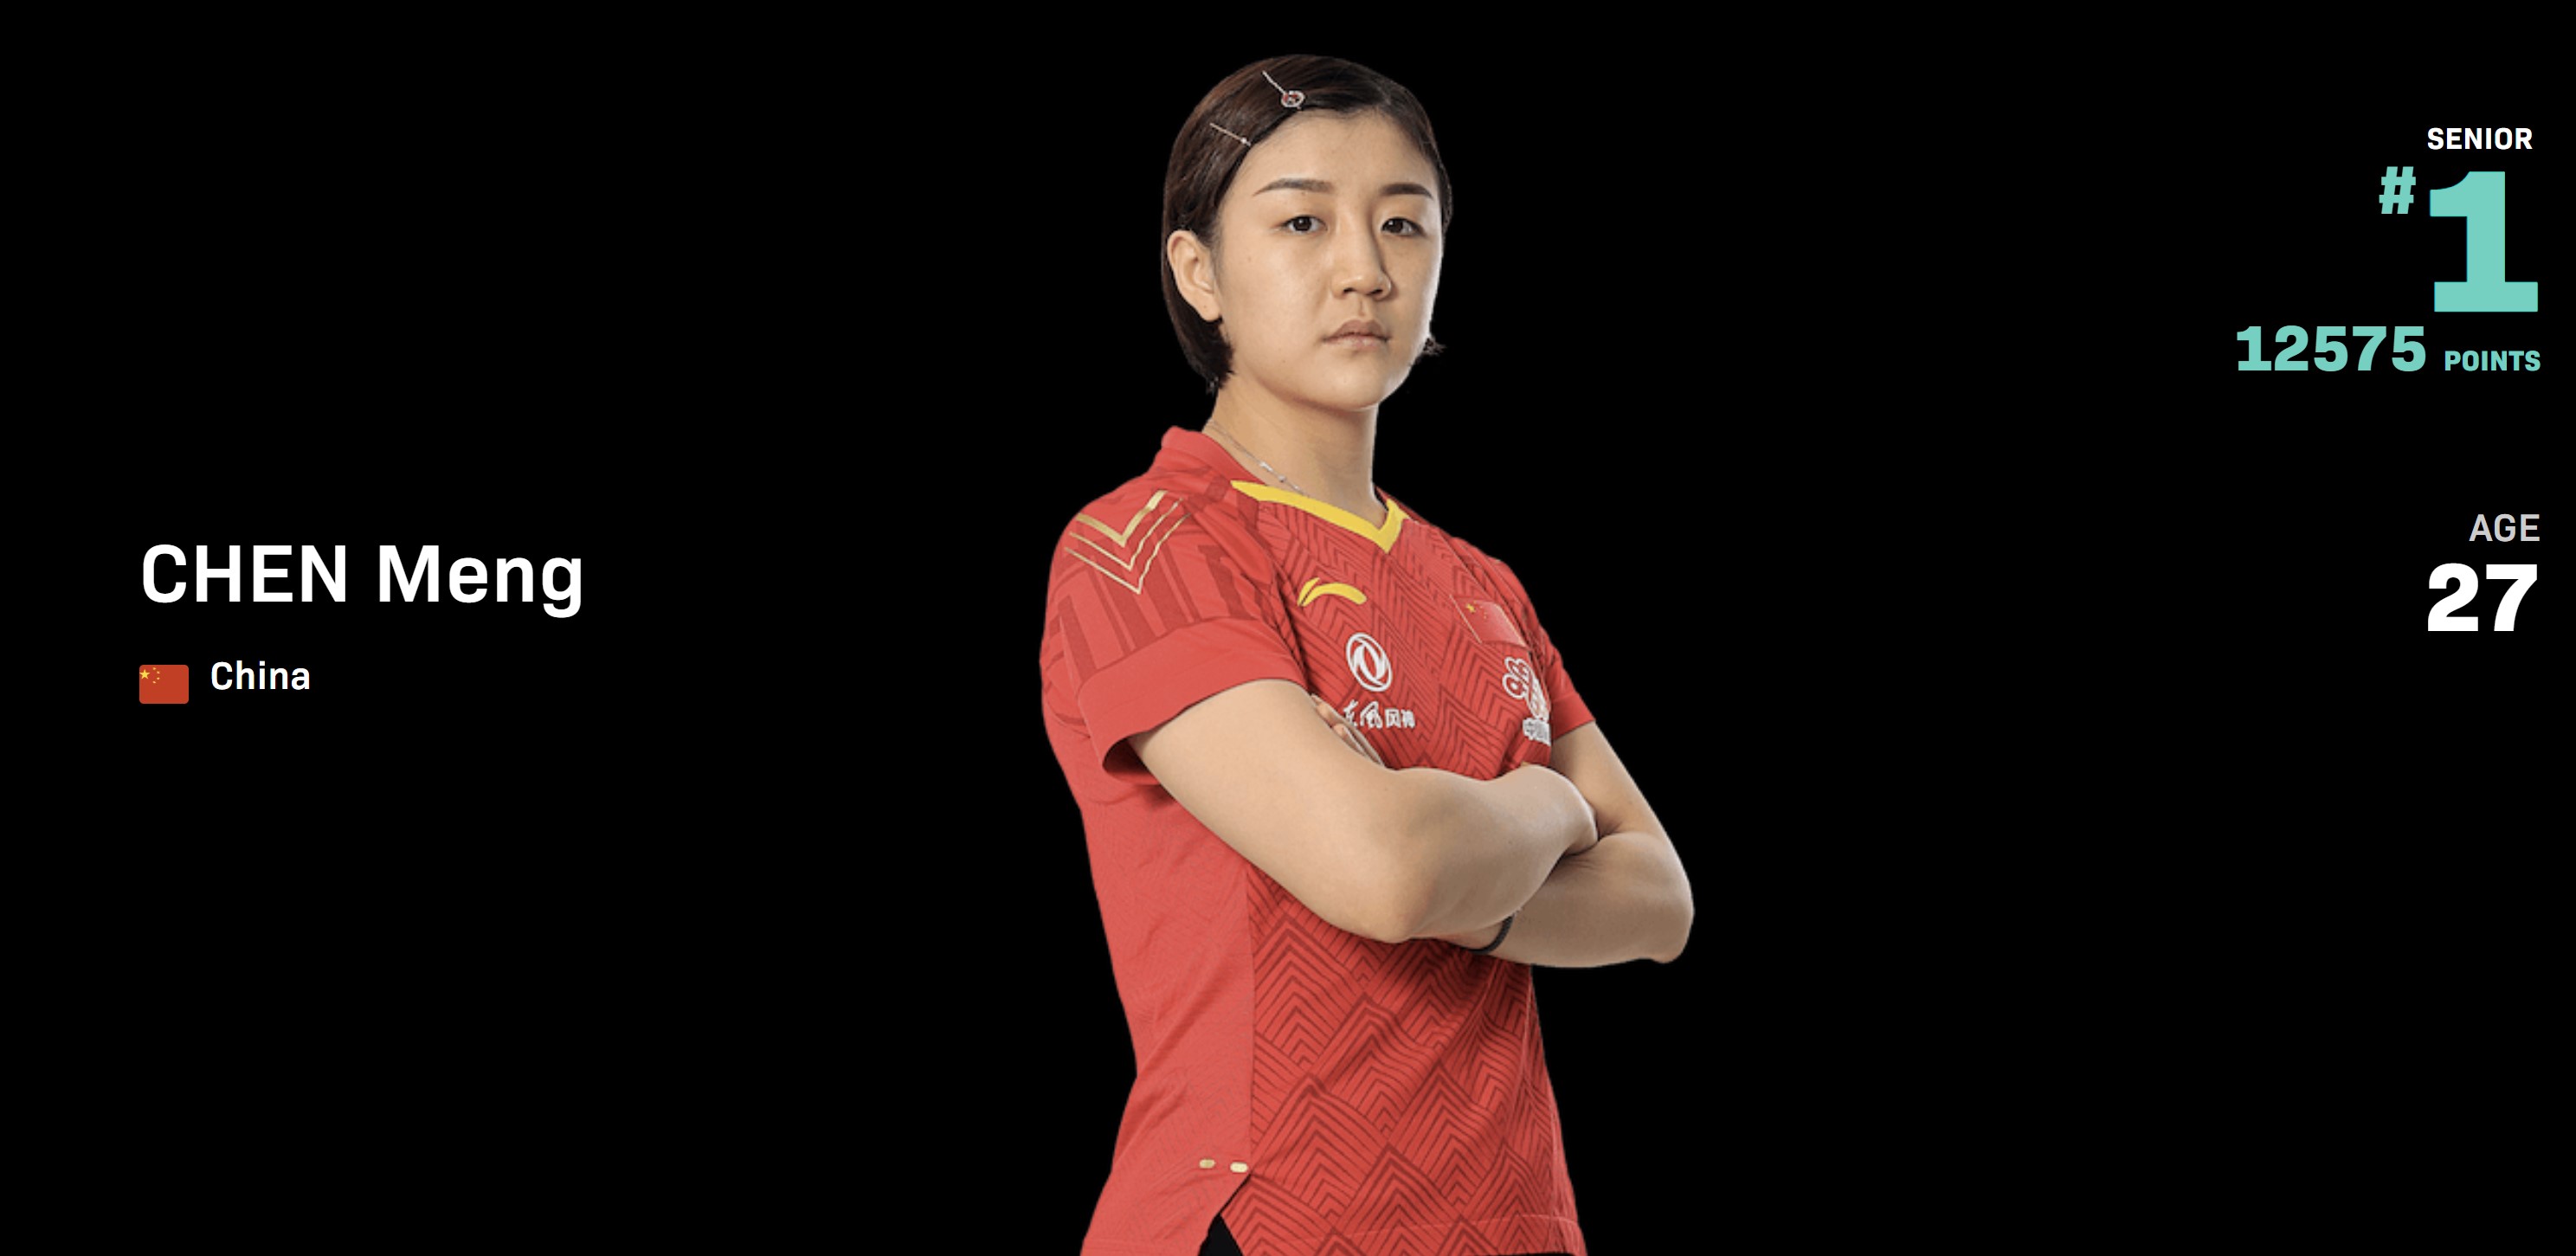 Olympic Champion and World No 1 Chen Meng, is favoured to win the Women's Singles in WTT Cup Finals in Singapore!